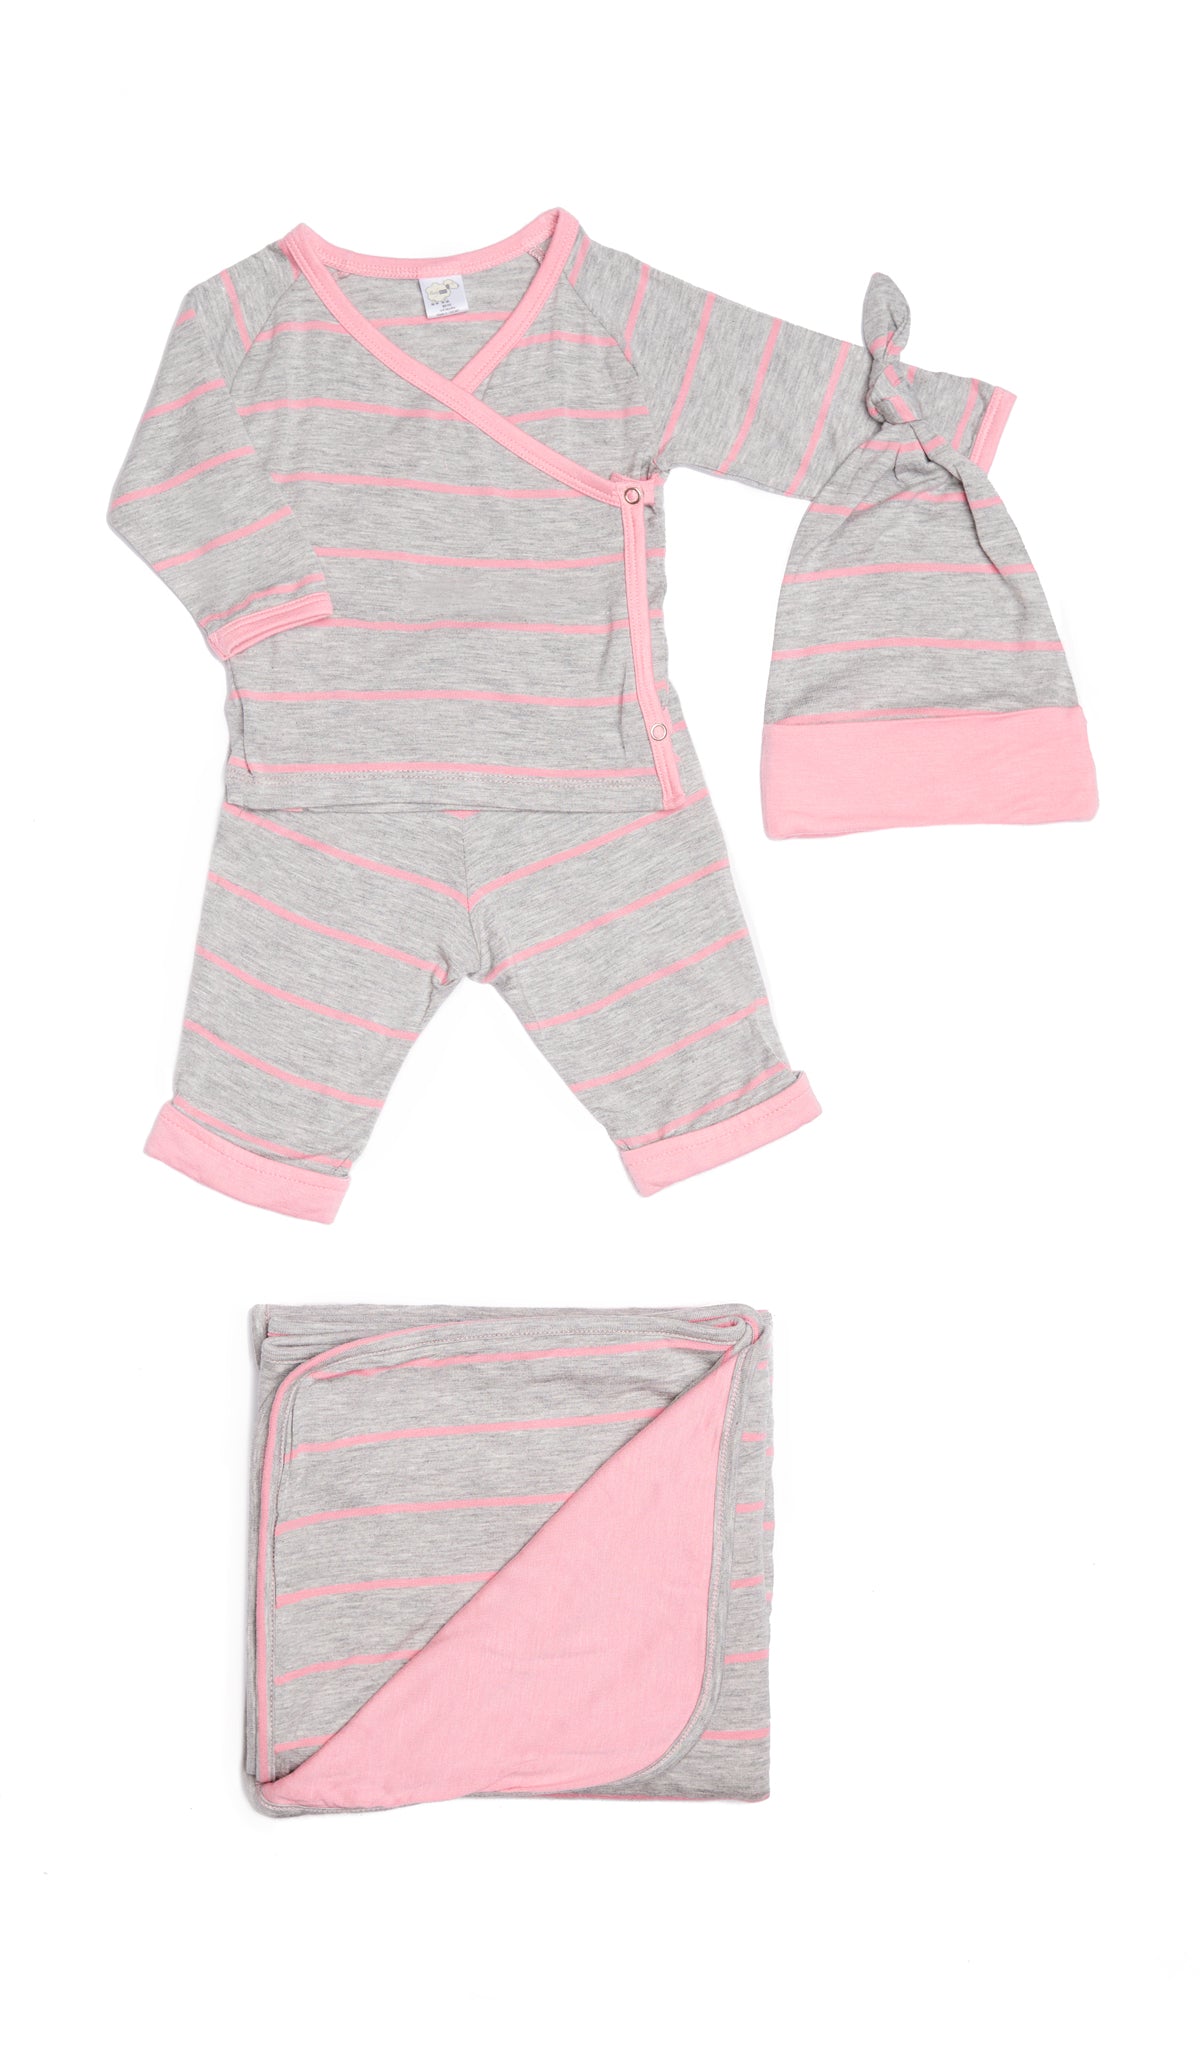 Rosebud Baby's Take-Me-Home 3 Piece set flat shot showing long sleeve kimono top and cuffed pant with matching knotted baby hat. Matching blanket folded into a square is sold separately.